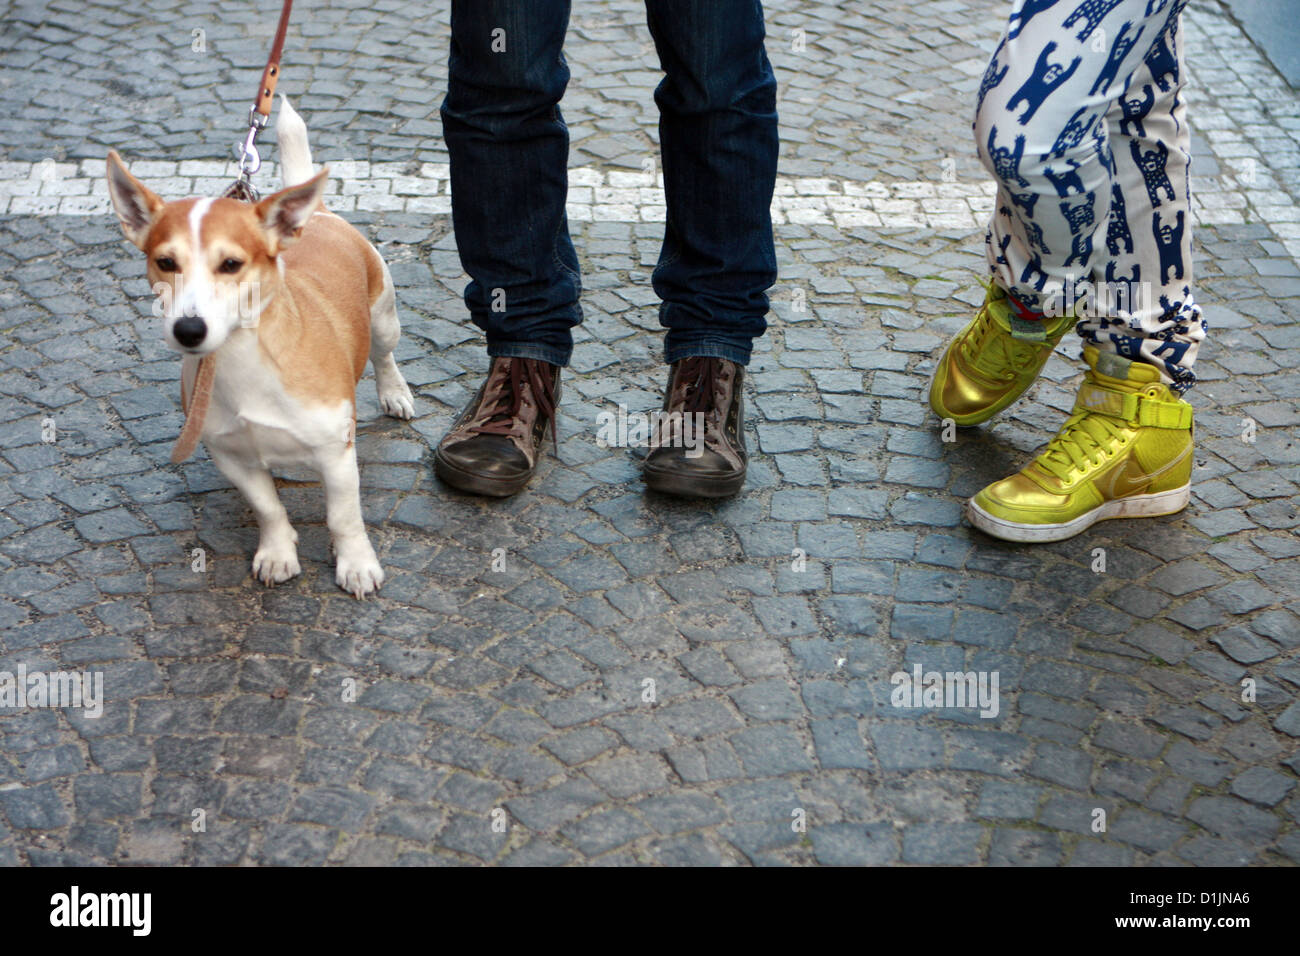 Two men dog and gold shoes, low section Stock Photo